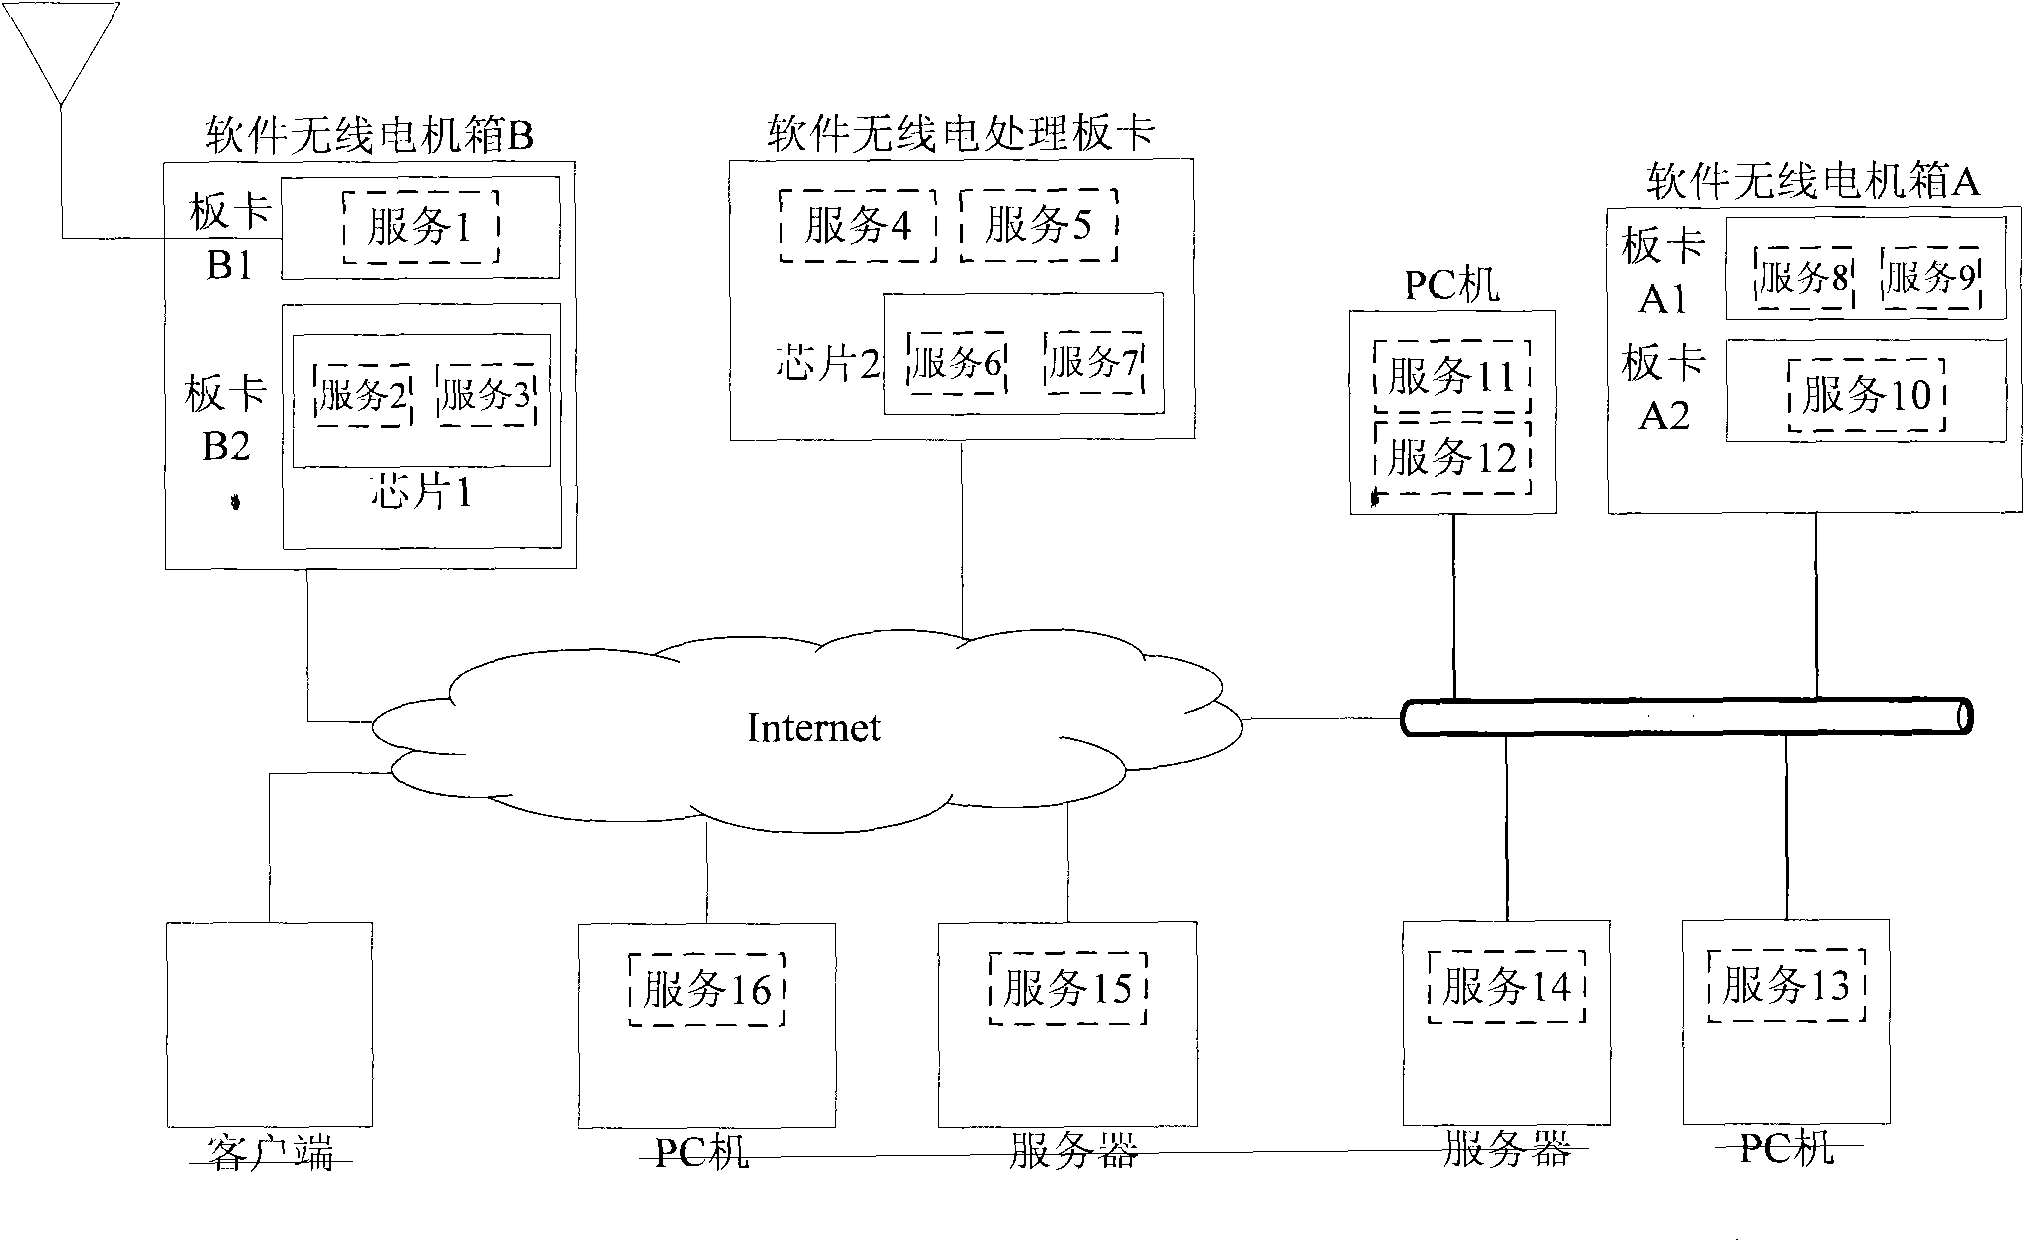 Software radio system based on service-oriented architecture